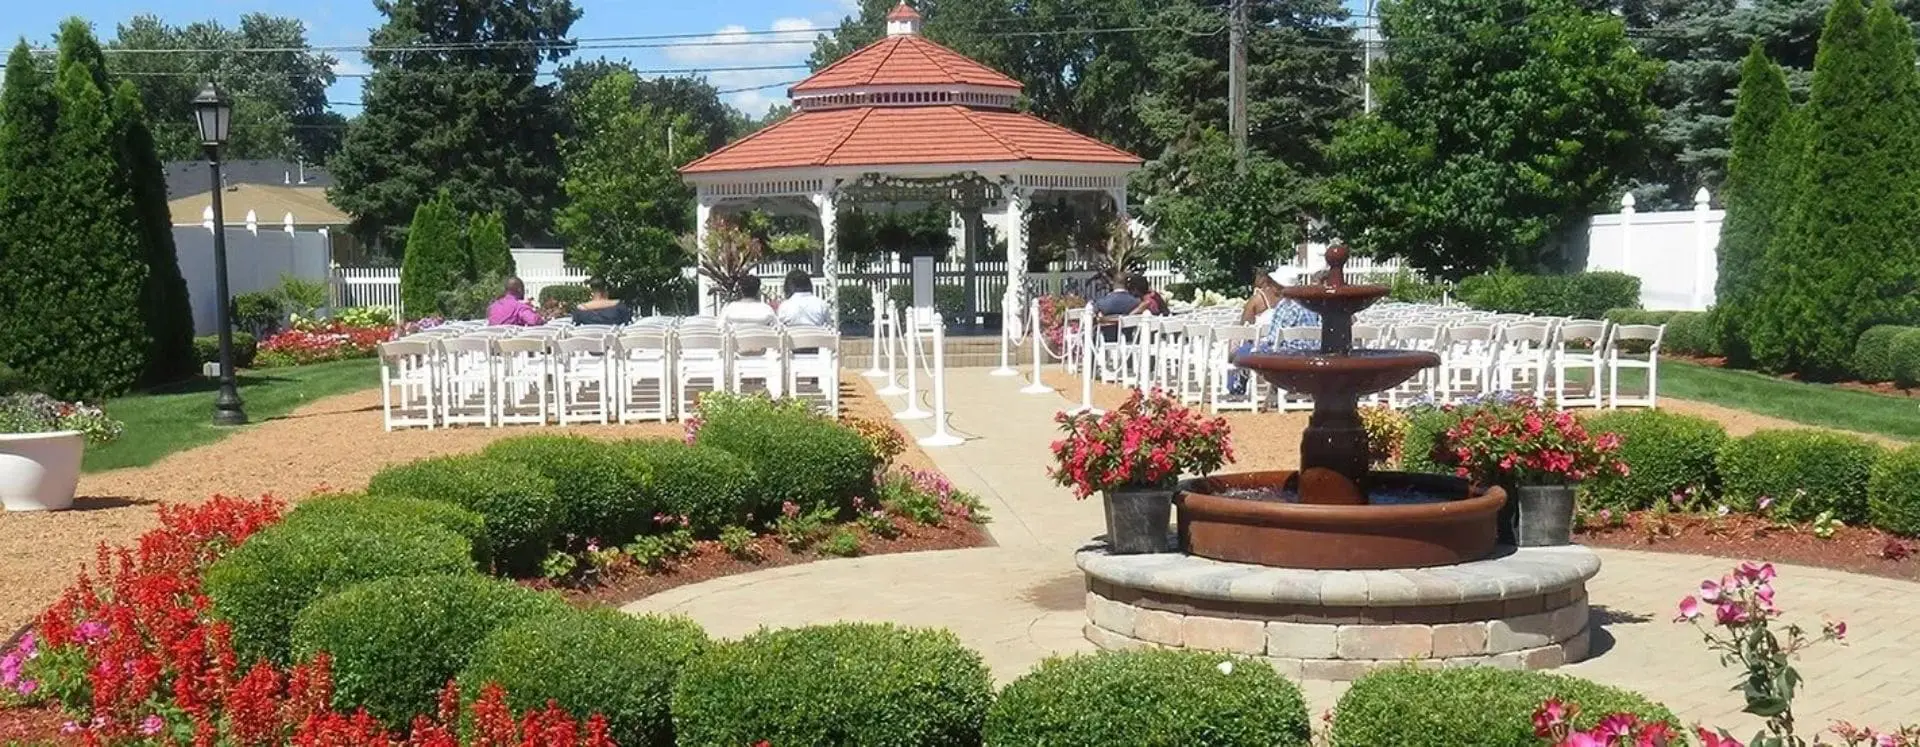 A gazebo with chairs and flowers in the foreground.